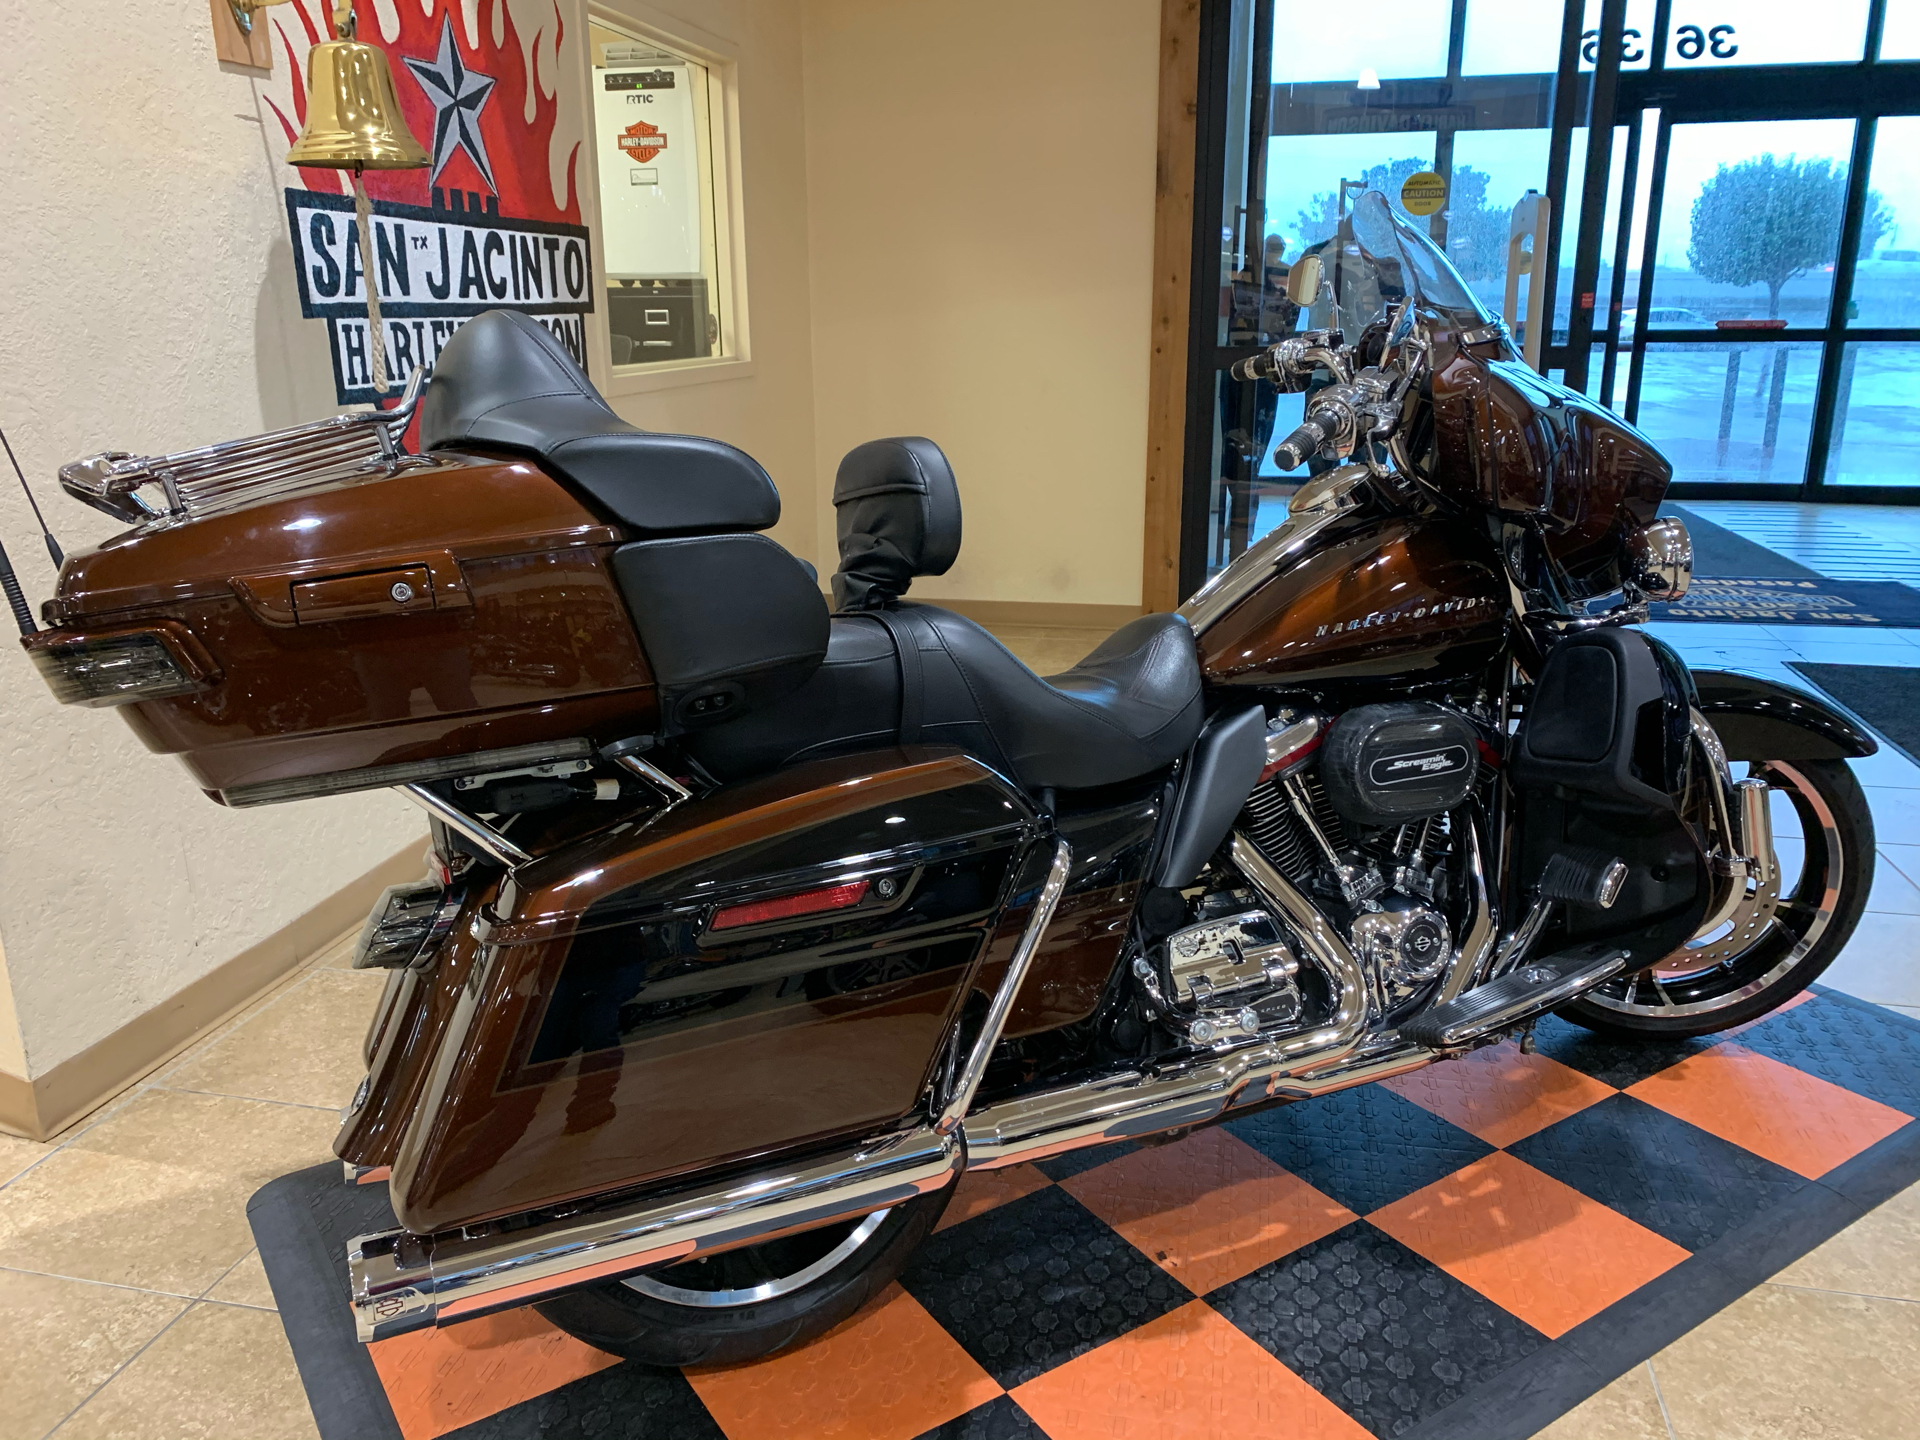 Used 2019 Harley Davidson Cvo Limited Motorcycles In Pasadena Tx 951944 Auburn Sunglo Black Hole With Rich Bourbon